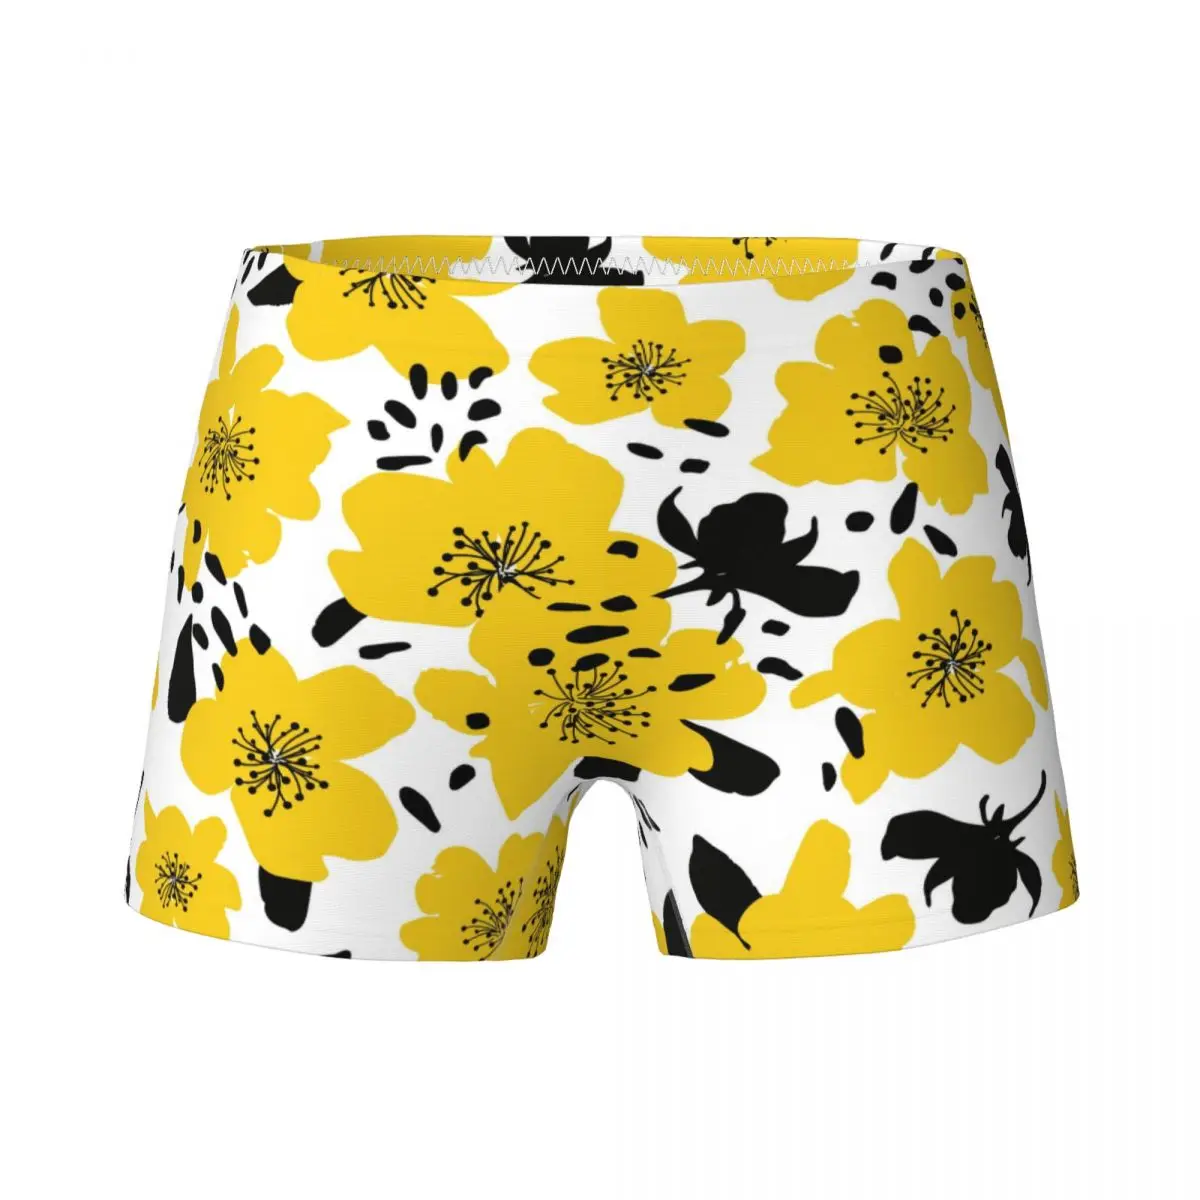 

Young Girls Yellow Flower Boxers Child Cotton Cute Underwear Teenagers Cute Floral Underpants Breathable Shorts 4-15Y